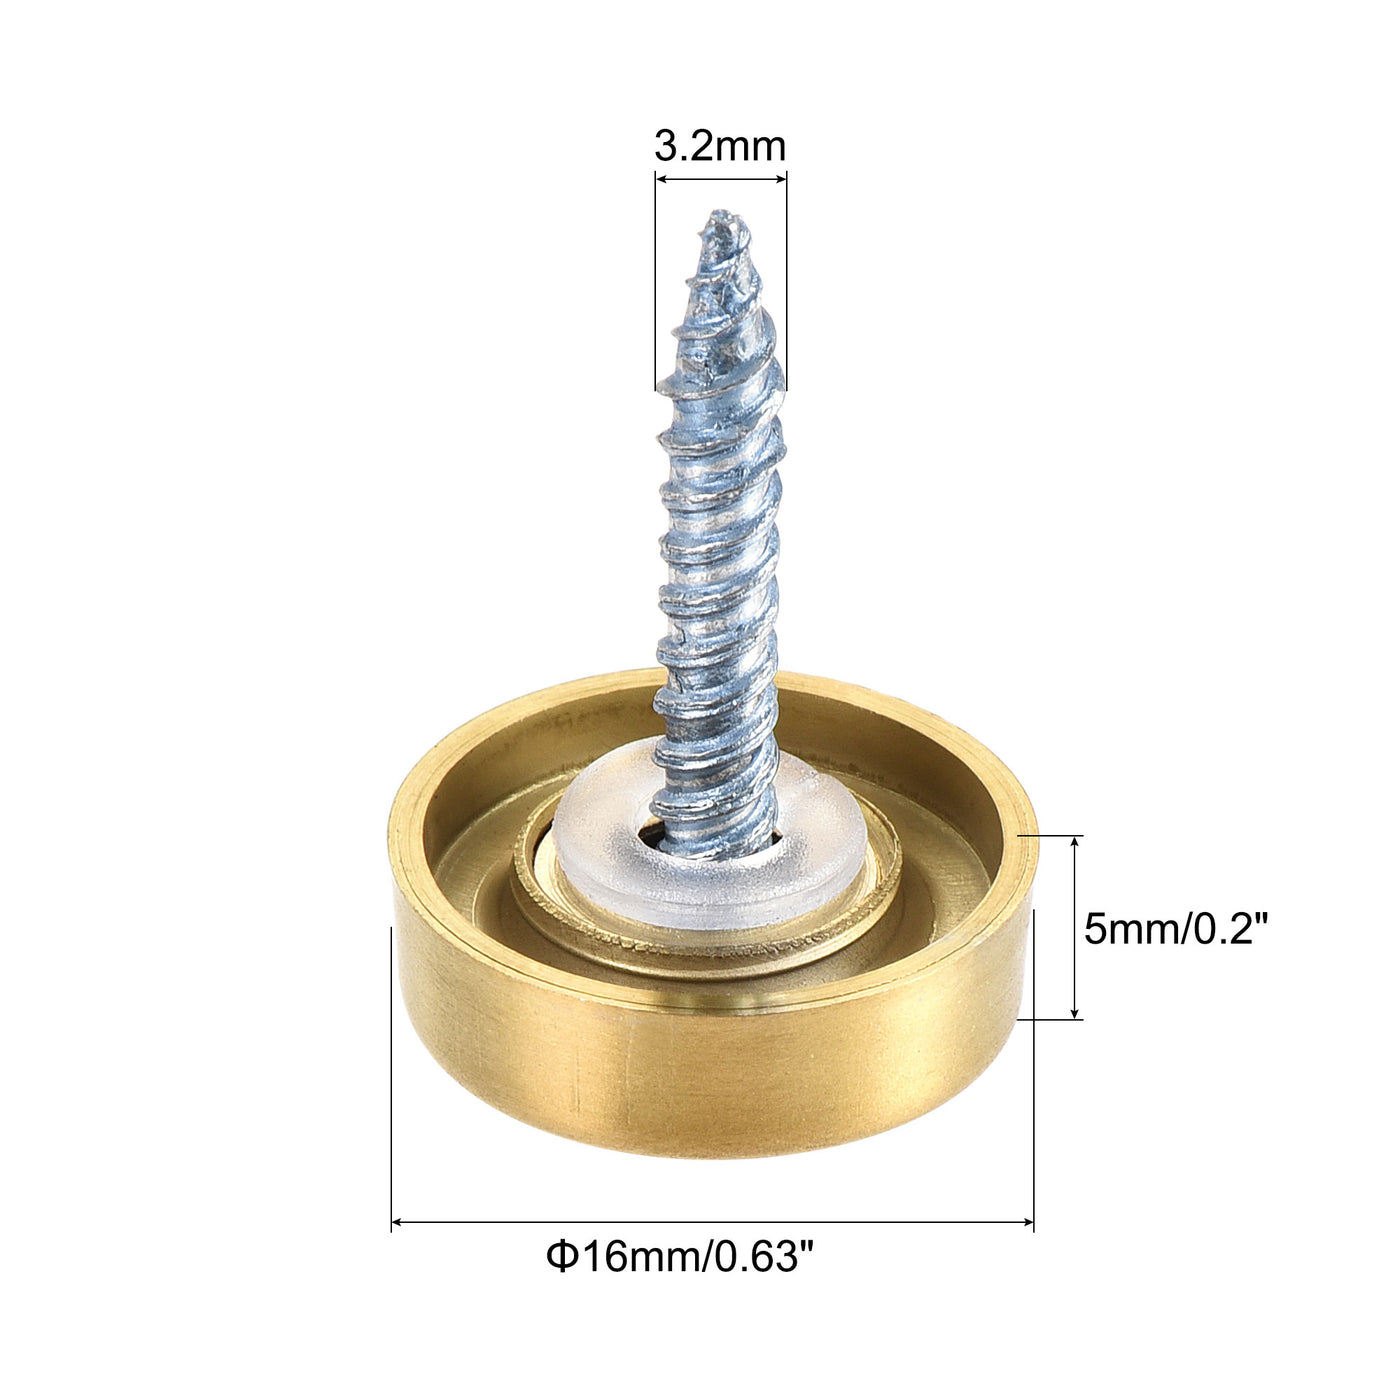 uxcell Uxcell Mirror Screws, 16mm/0.63", 10pcs Decorative Cap Fasteners Cover Nails, Wire Drawing, Gold Tone 304 Stainless Steel